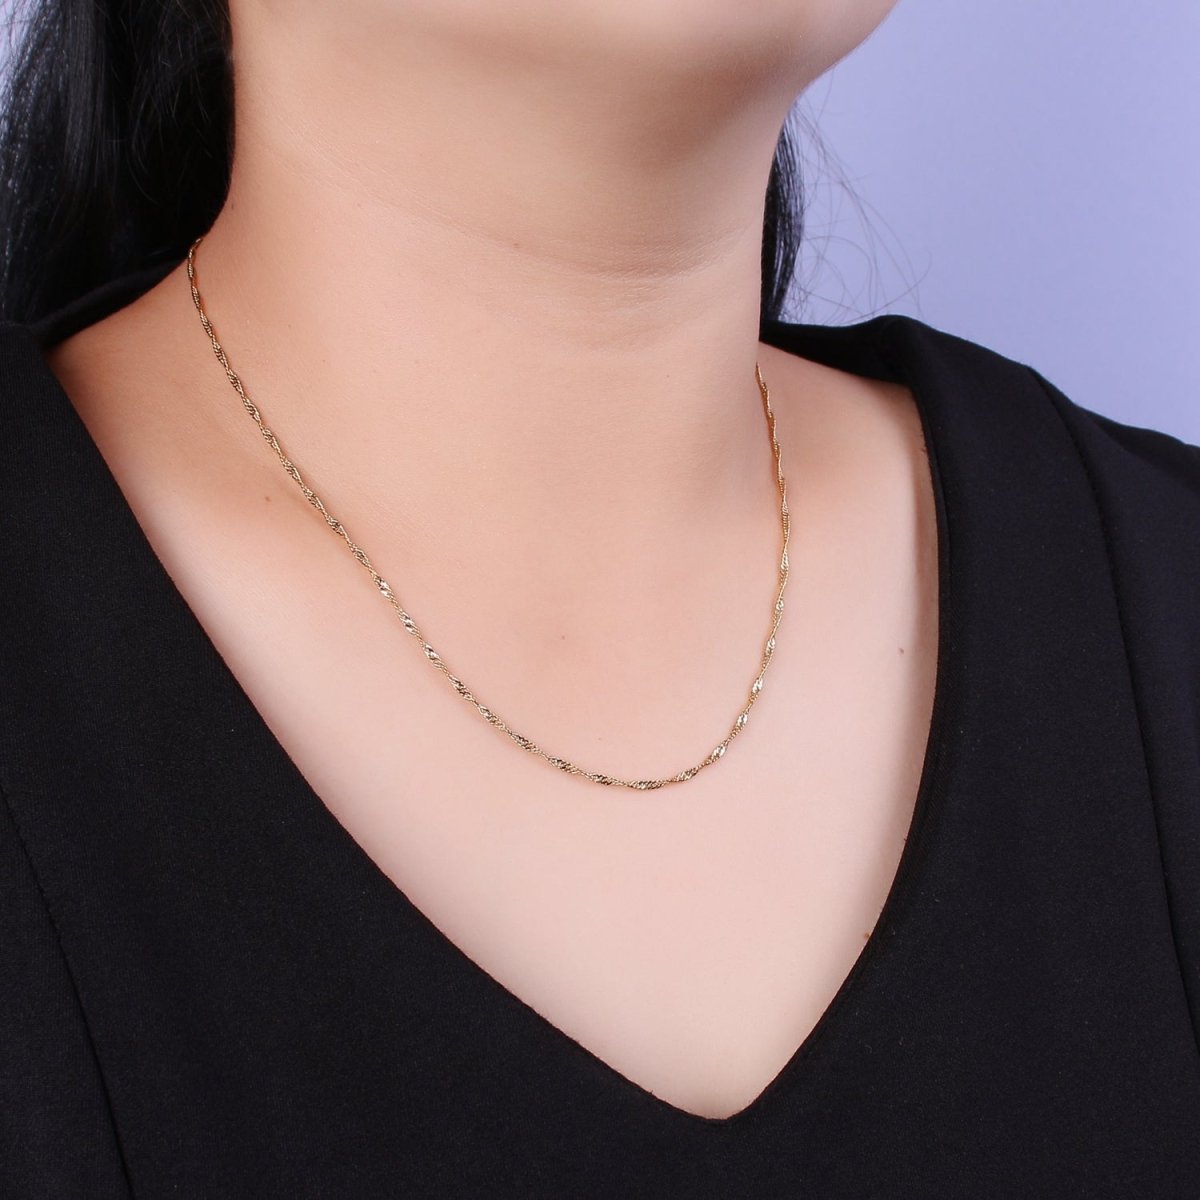 18K Gold Filled Singapore Chain Necklace, 1.5mm In Width, Ready To Wear Silver Twist Chain Necklace 18 inch | WA-442 WA-443 WA-727 Clearance Pricing - DLUXCA